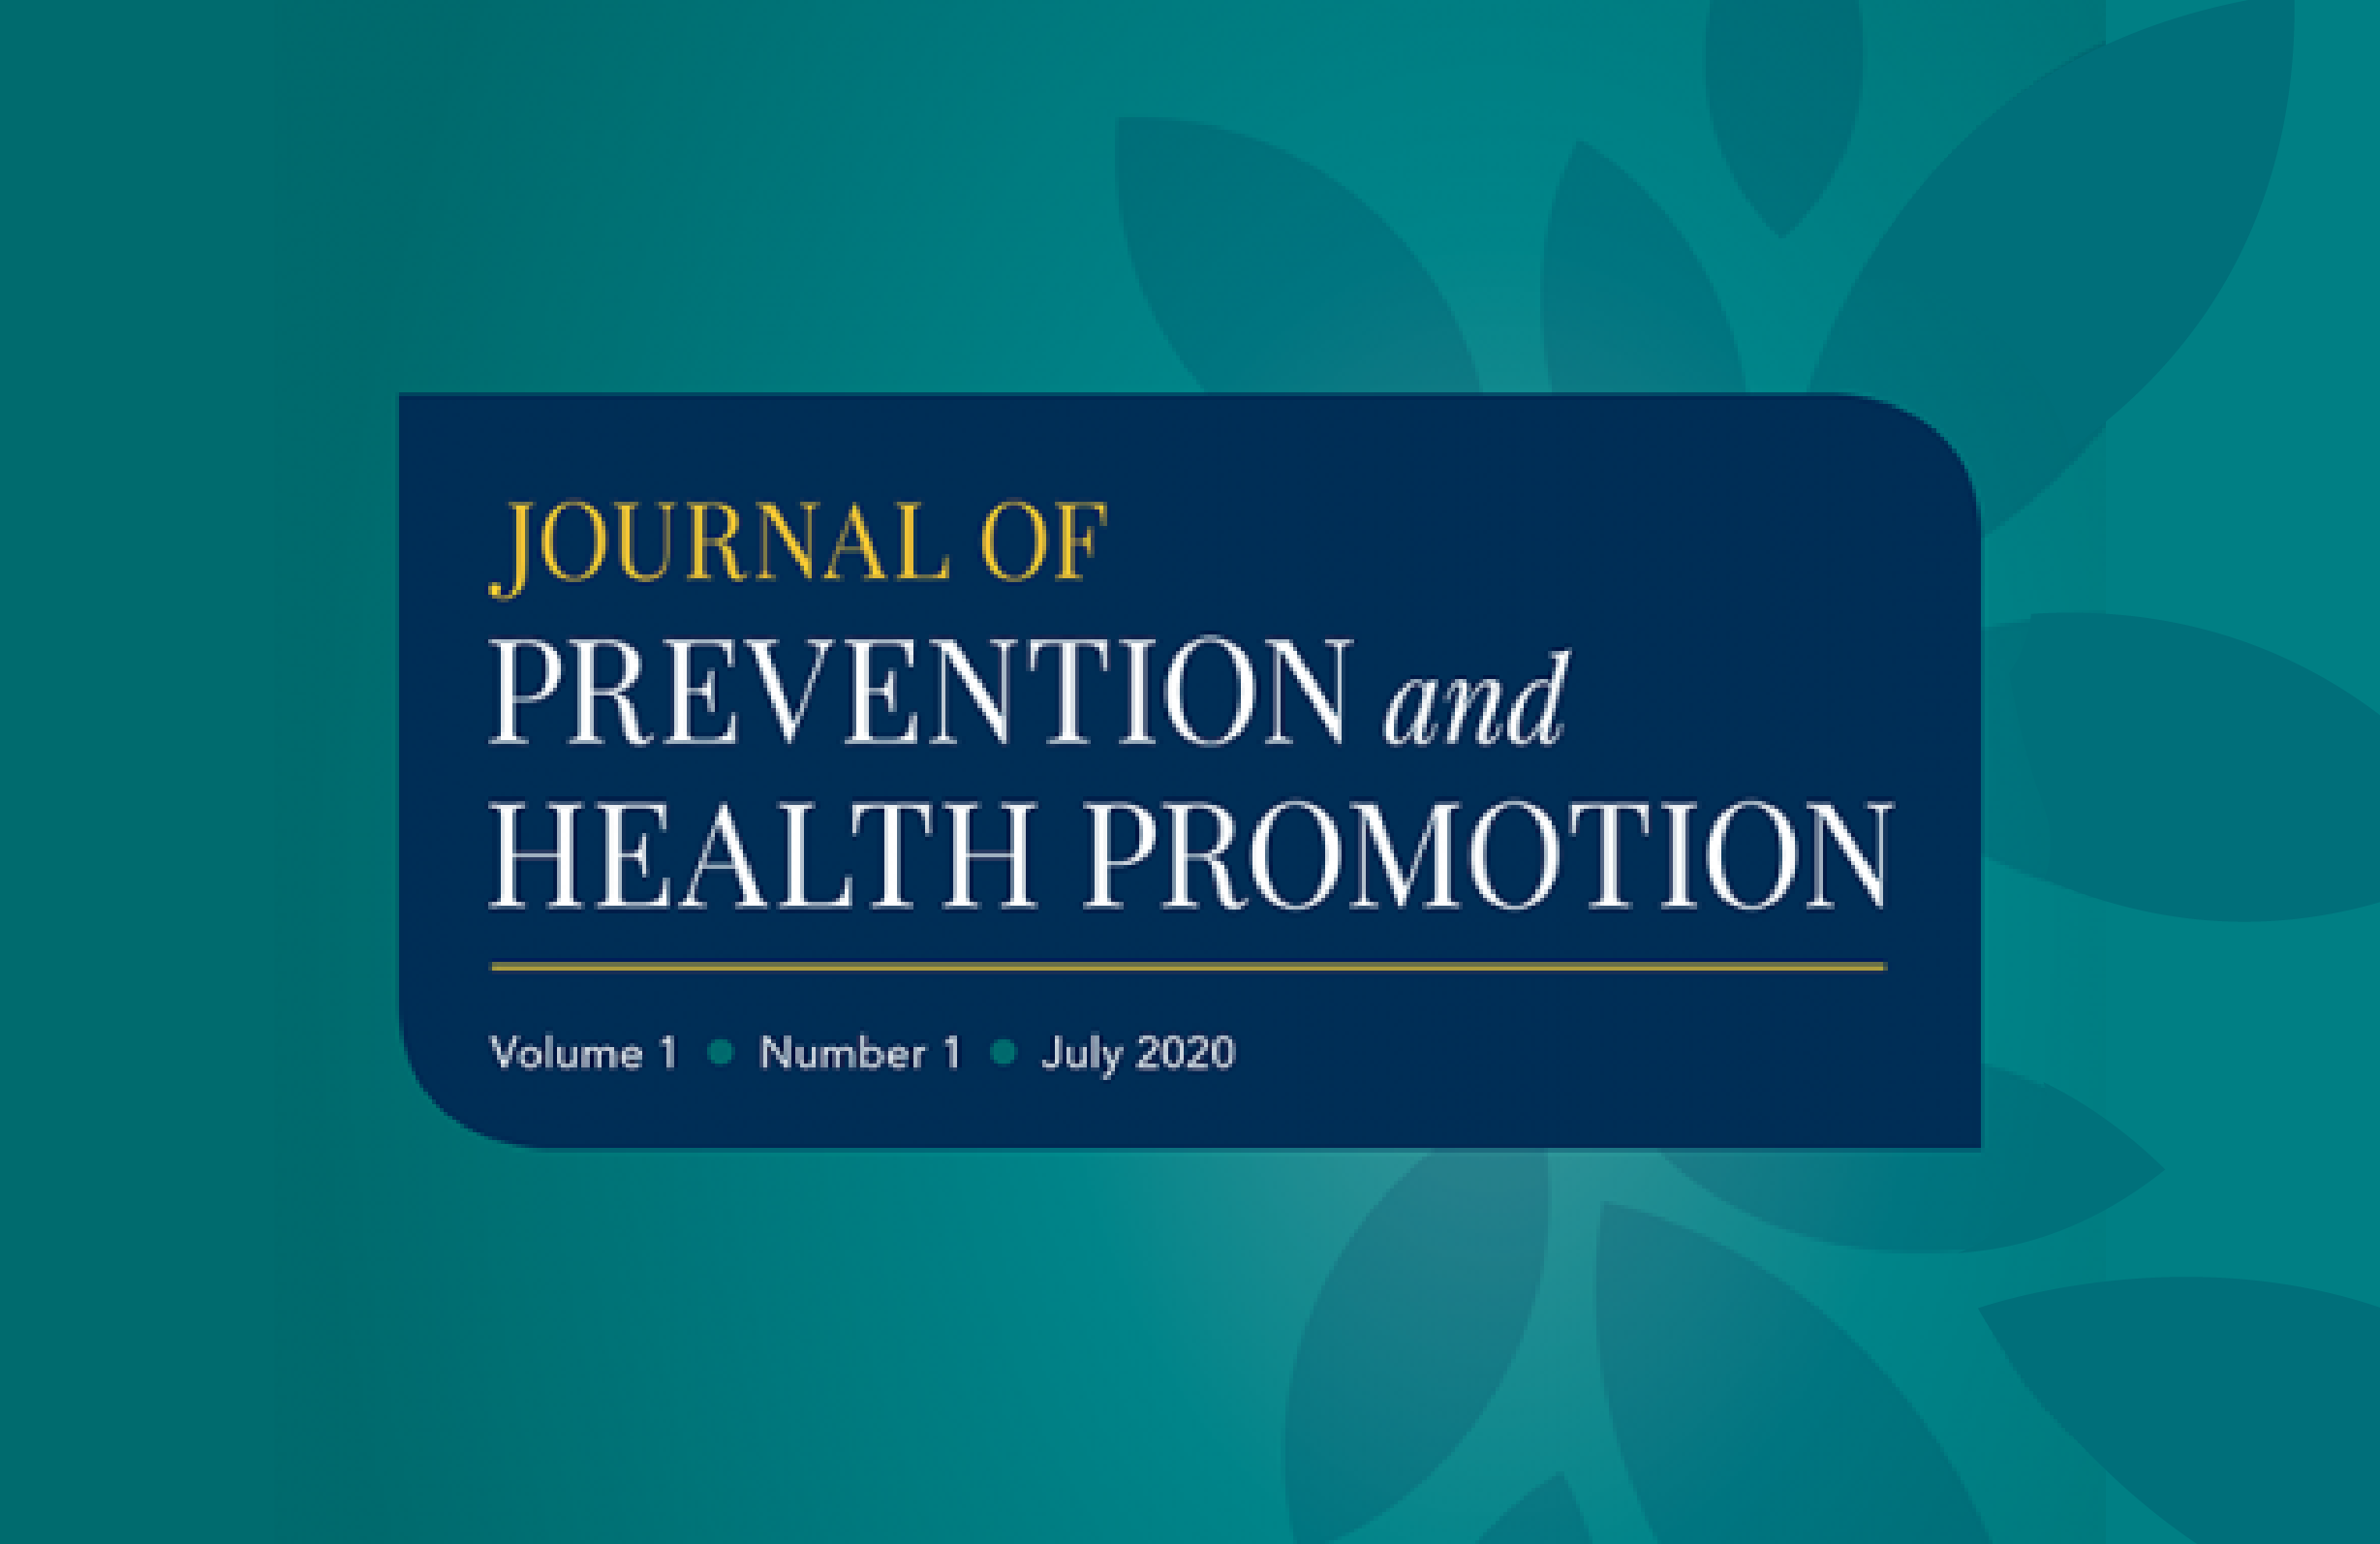 journal-of-prevention-and-health-promotion-journal-subscription-01-Oct-2020